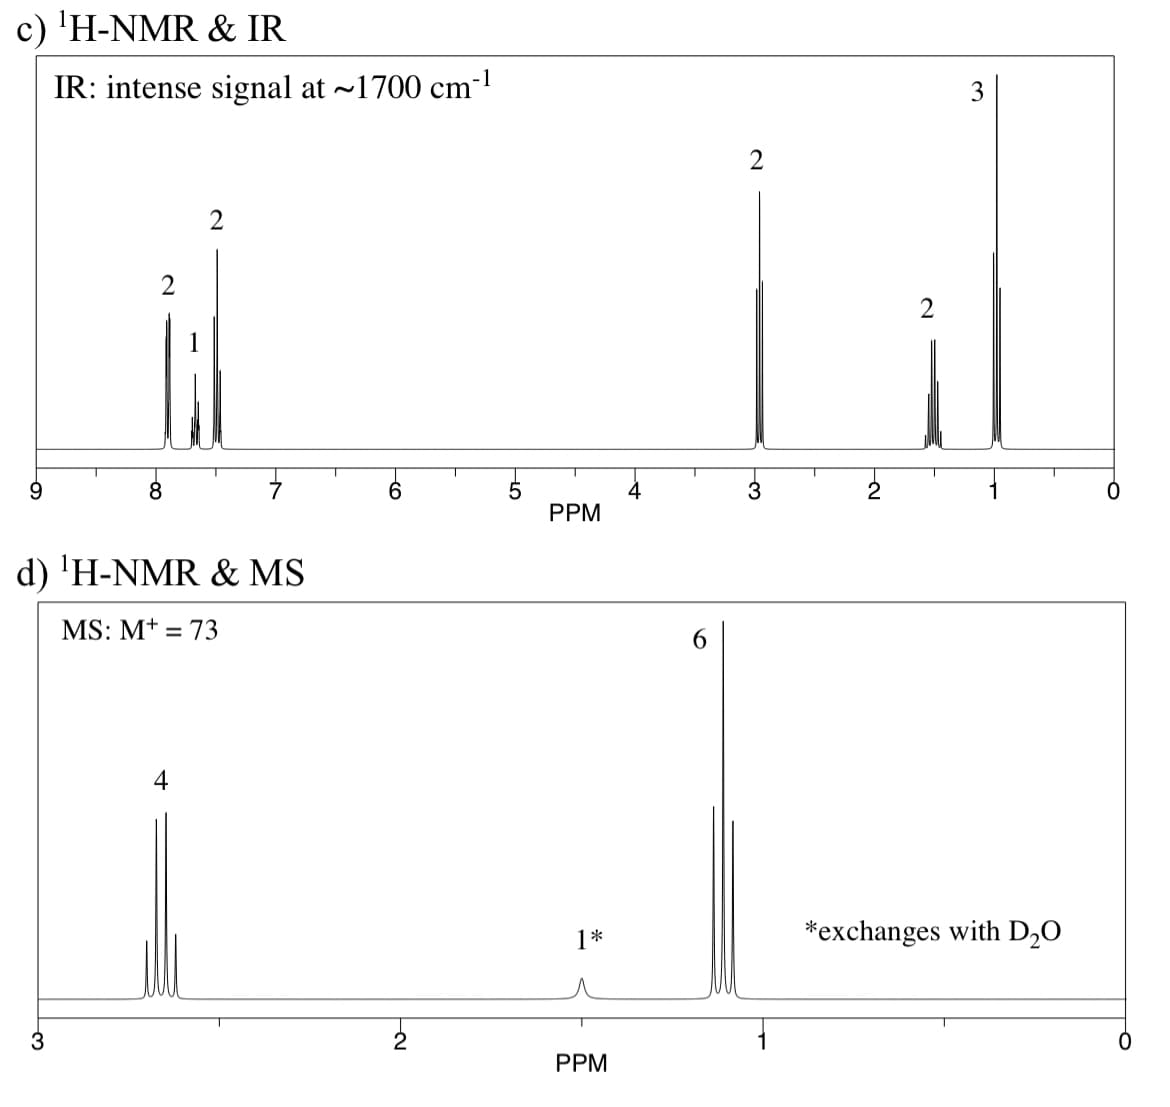 c) ¹H-NMR & IR
1
IR: intense signal at ~1700 cm-¹
9
-∞
3
2
d) ¹H-NMR & MS
MS: M+ = 73
2
4
-~
PPM
1*
PPM
6
2
3
2
2
*exchanges with D₂O